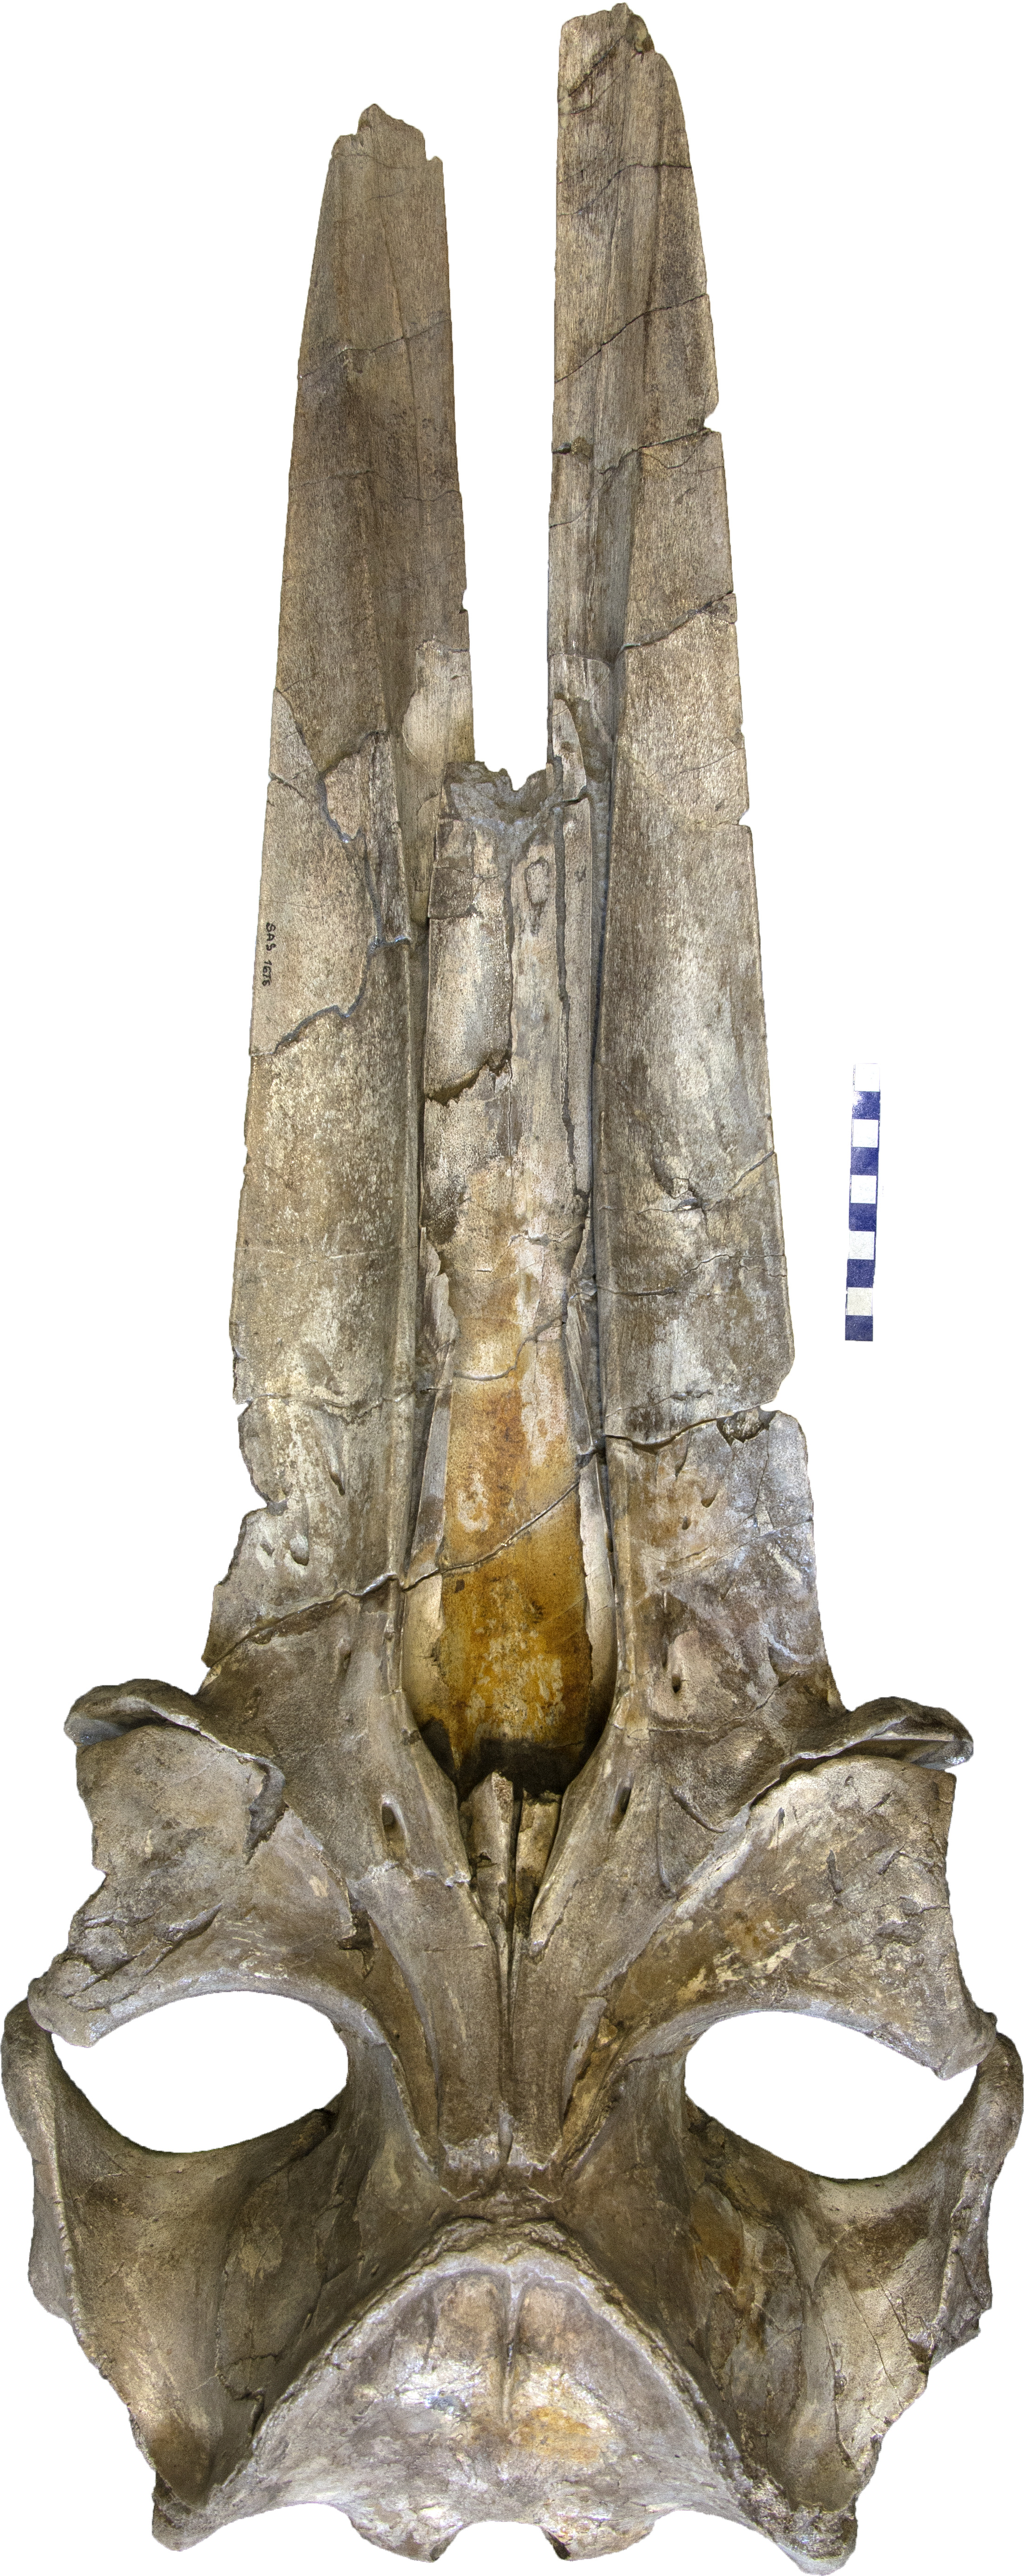 The fossil skull of the Late Miocene cetotheriid Piscobalaena nana from the Muséum National d'Histoire Naturelle. Image: Felix Marx